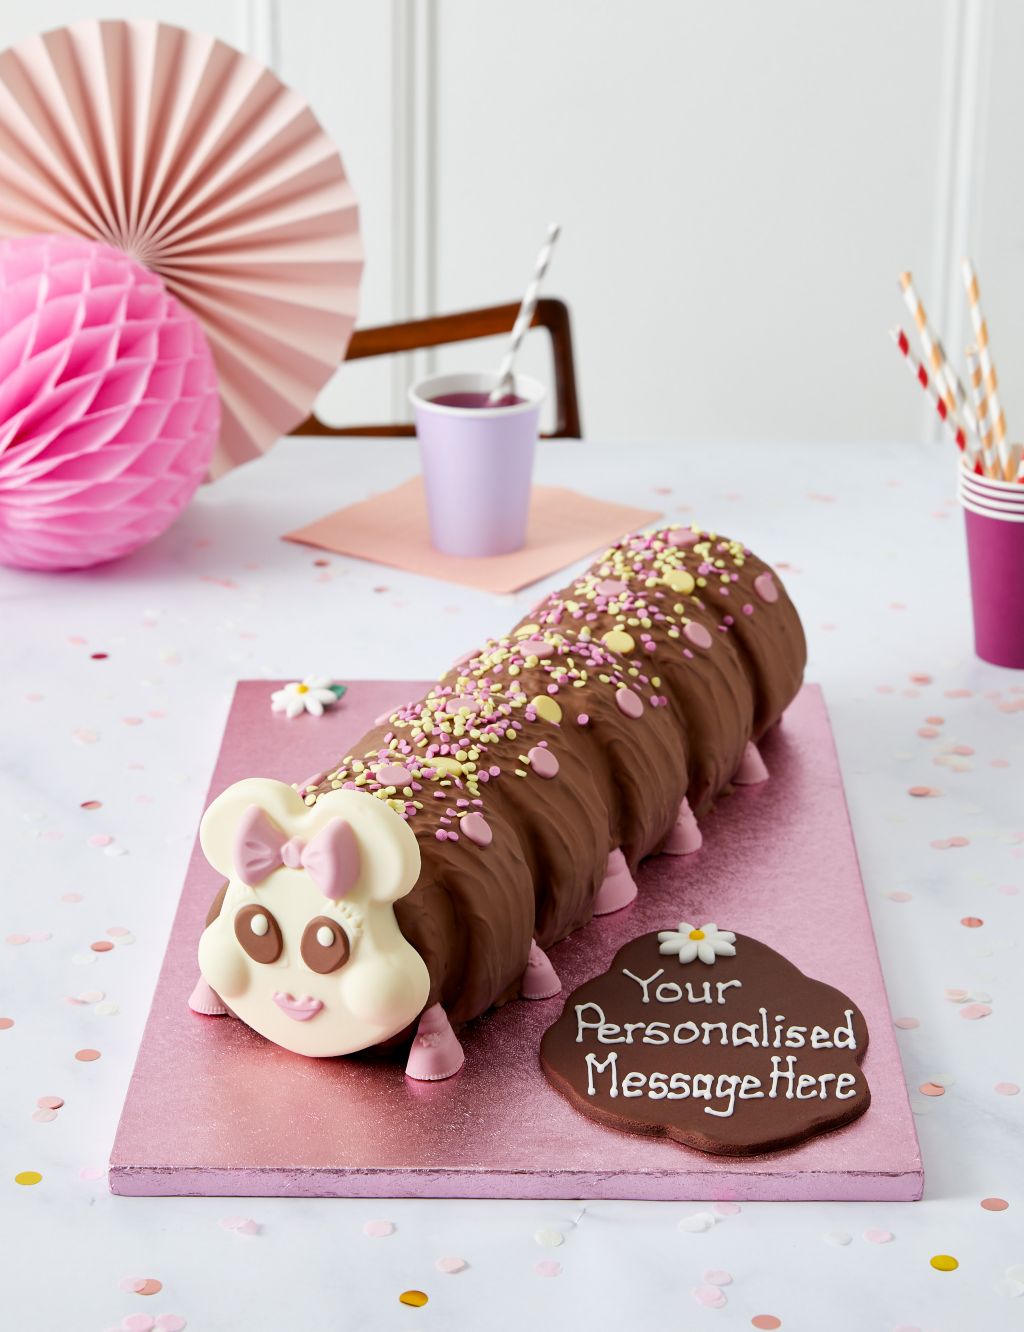 Personalised Connie the Giant Caterpillar™ Cake (Serves 40)